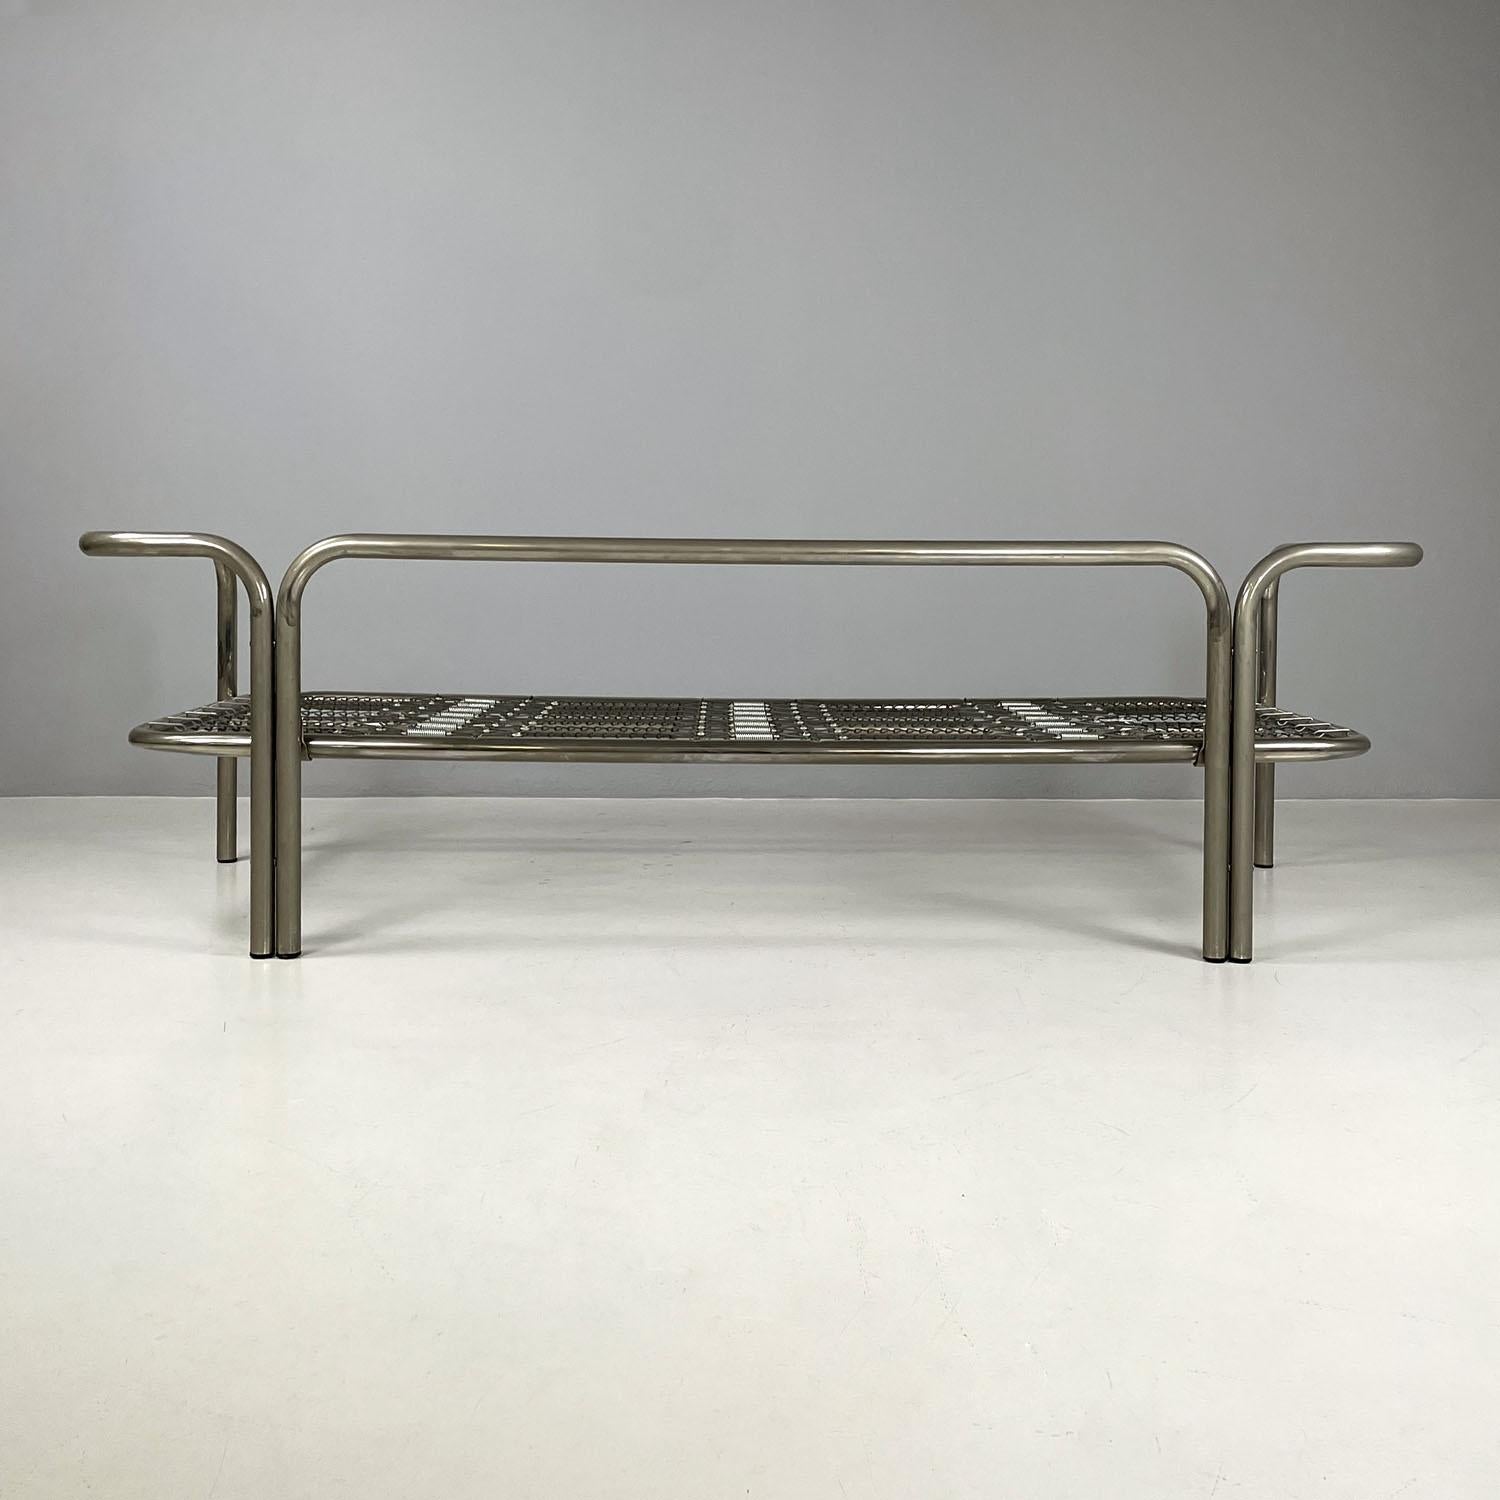 Late 20th Century Italian modern daybed sofa Locus Solus by Gae Aulenti for Poltronova, 1970s For Sale